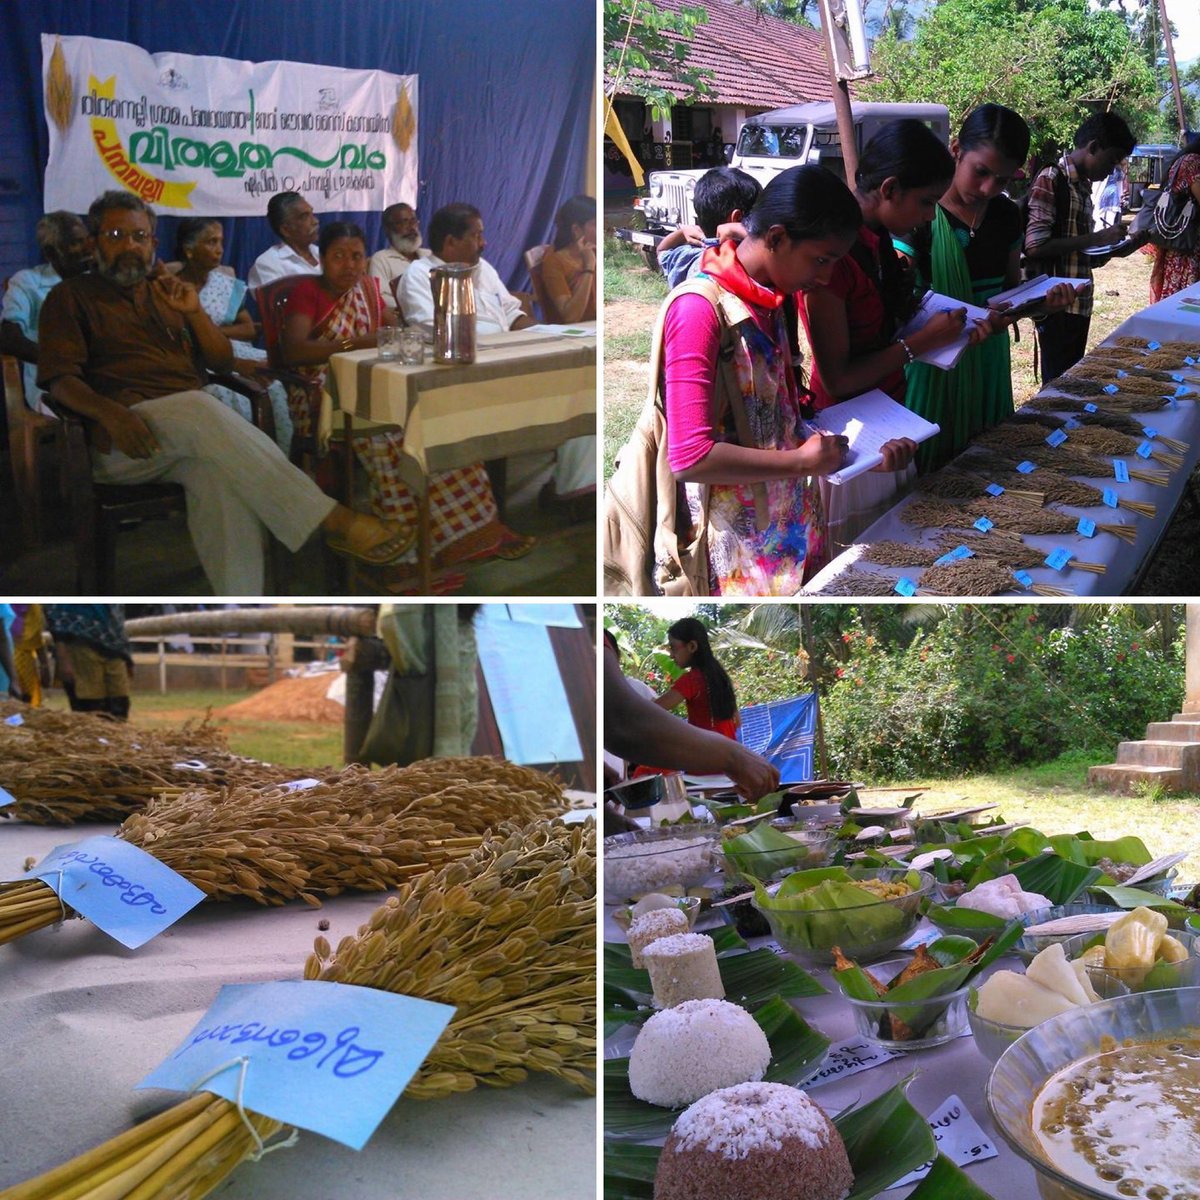 On #InternationalSeedDay, throwback to the Panavally seed festival of April-‘15. It was organised by Thirunelly Panchayath,Thanal &Save our Rice Campaign. Seed festivals celebrate seeds that feed us,revive interest in conserving seeds and preserving biodiversity #MondayMemories